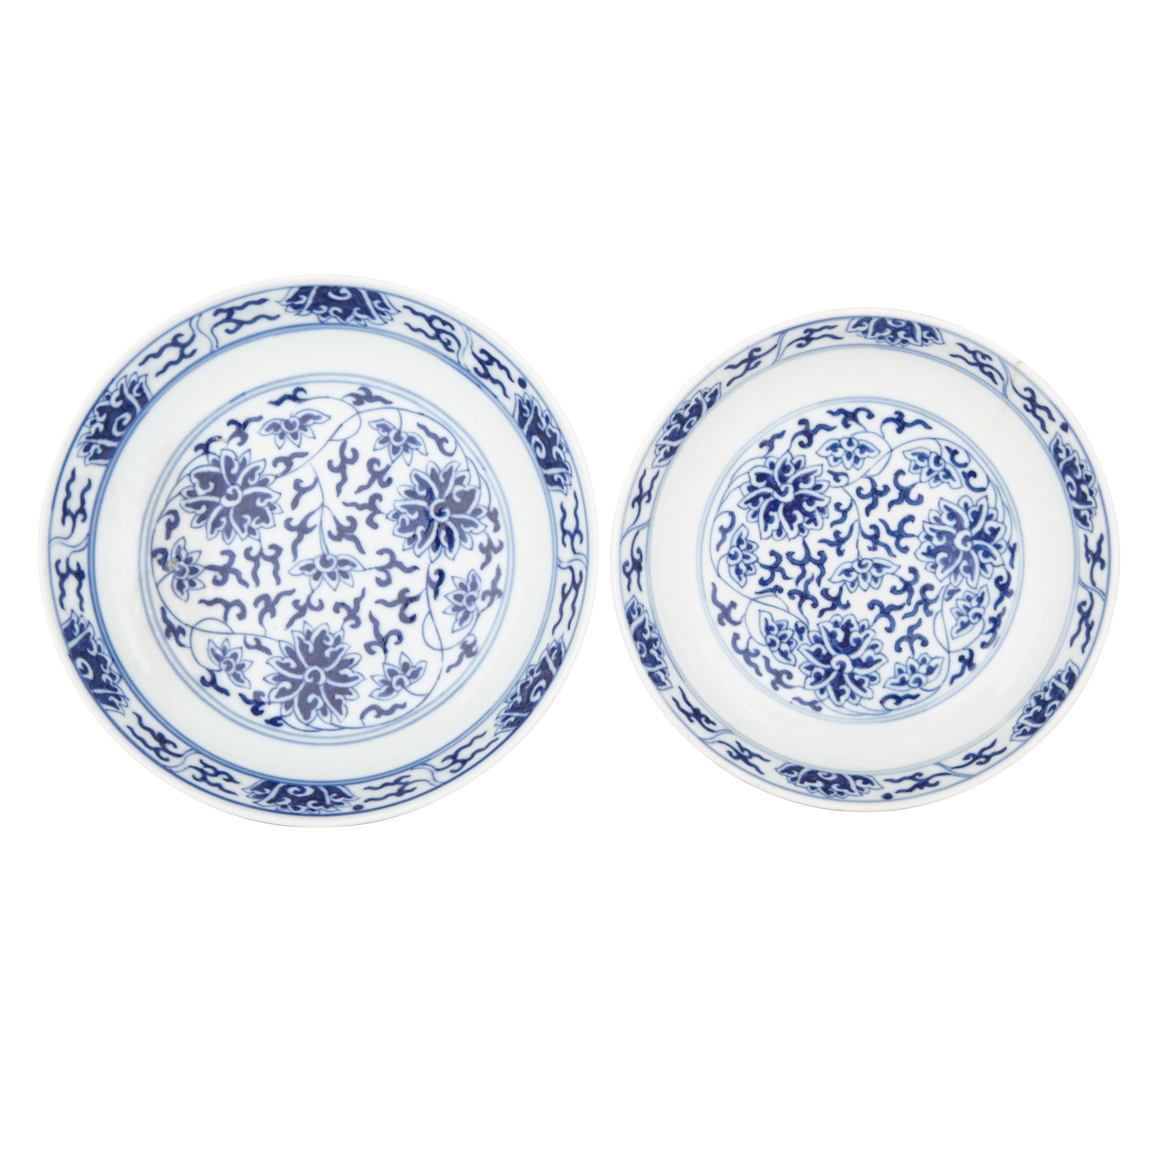 Pair of Blue and White Lotus Dishes, Guangxu Six-Character Marks in Underglaze Blue and of the Period (1875-1908)